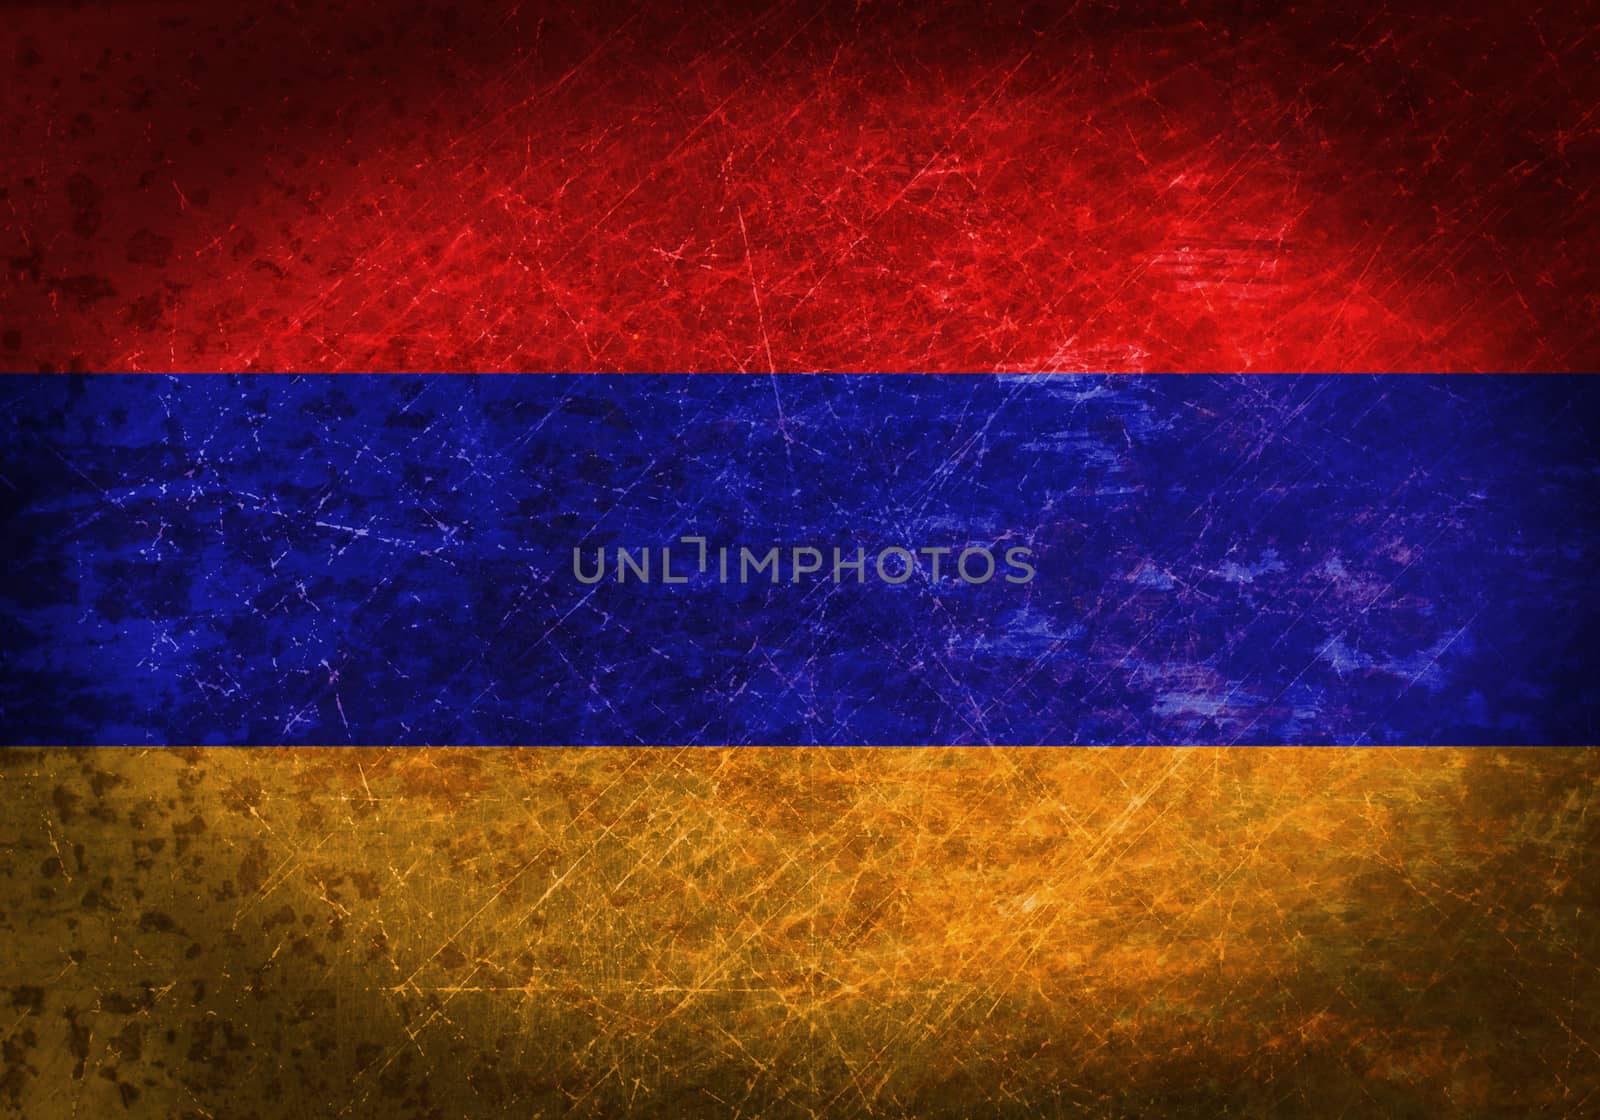 Old rusty metal sign with a flag - Armenia